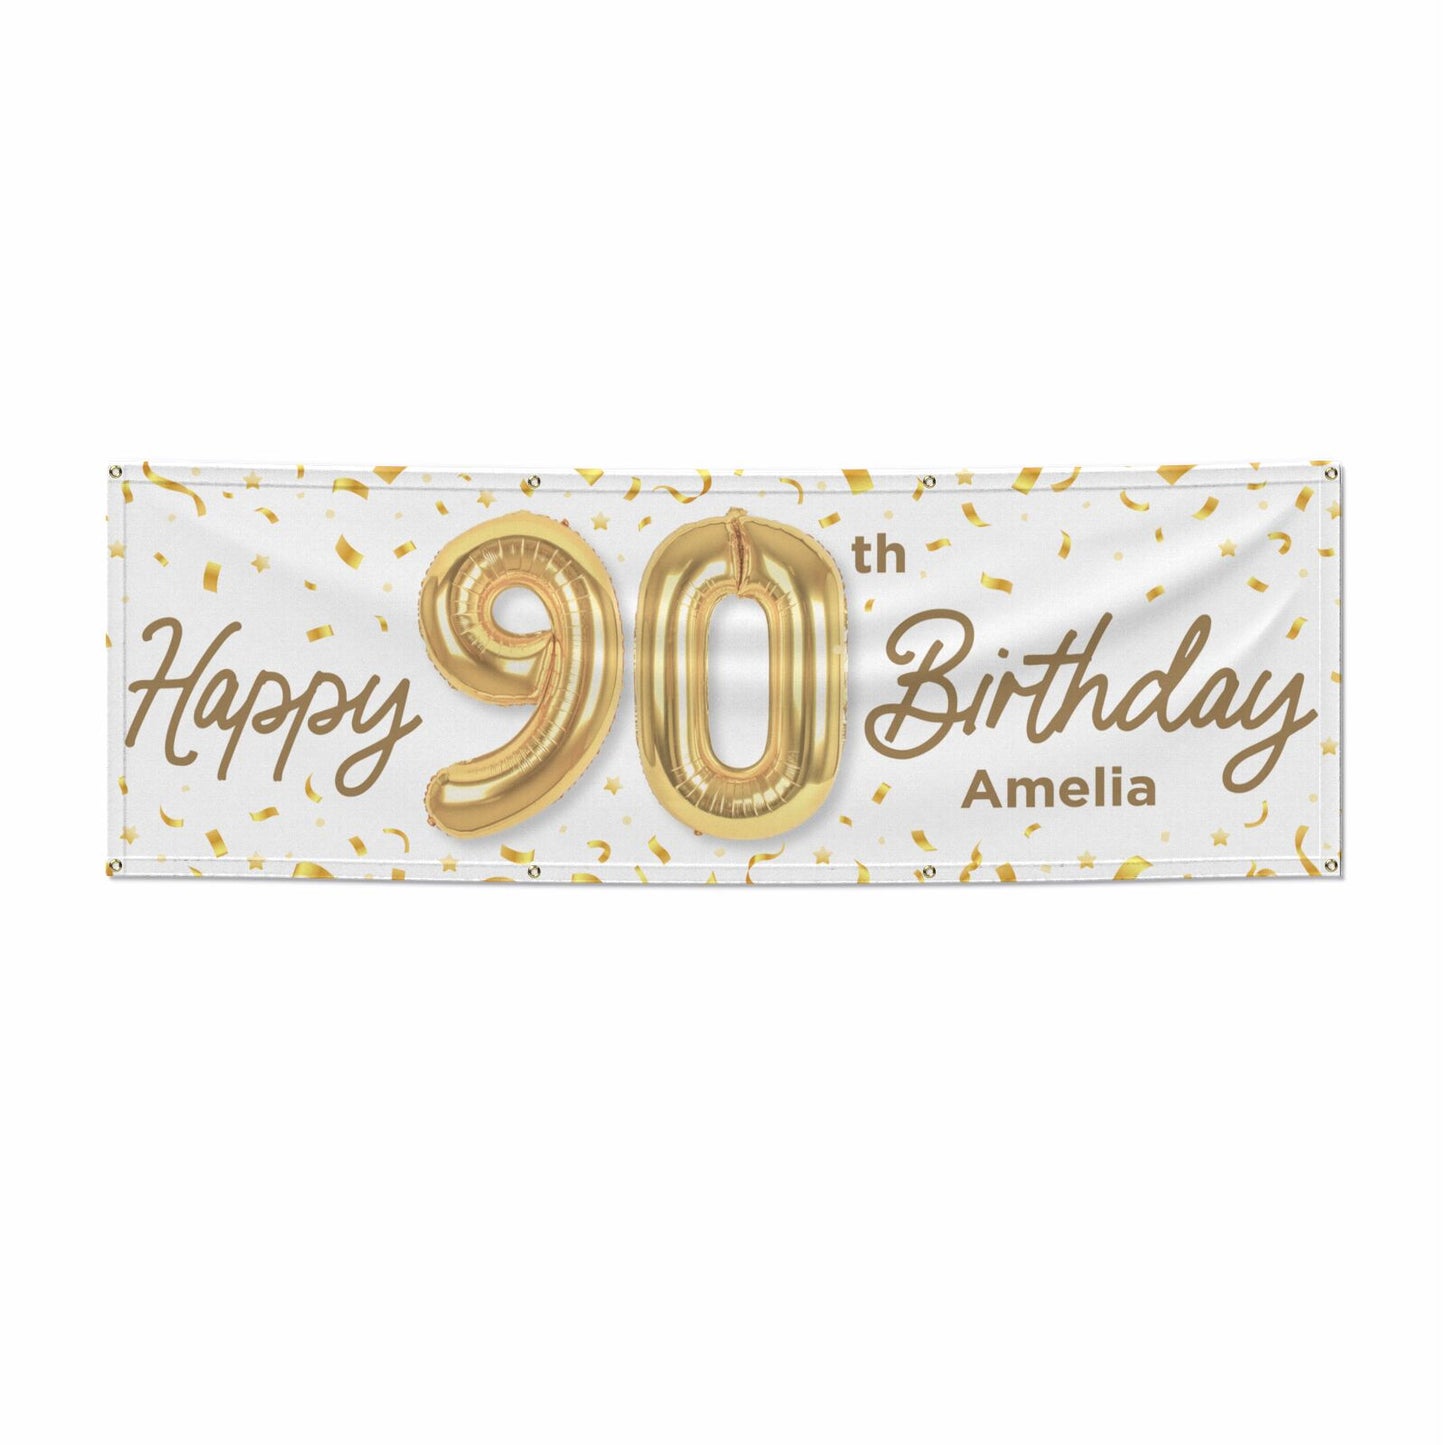 Personalised 90th Birthday 6x2 Vinly Banner with Grommets